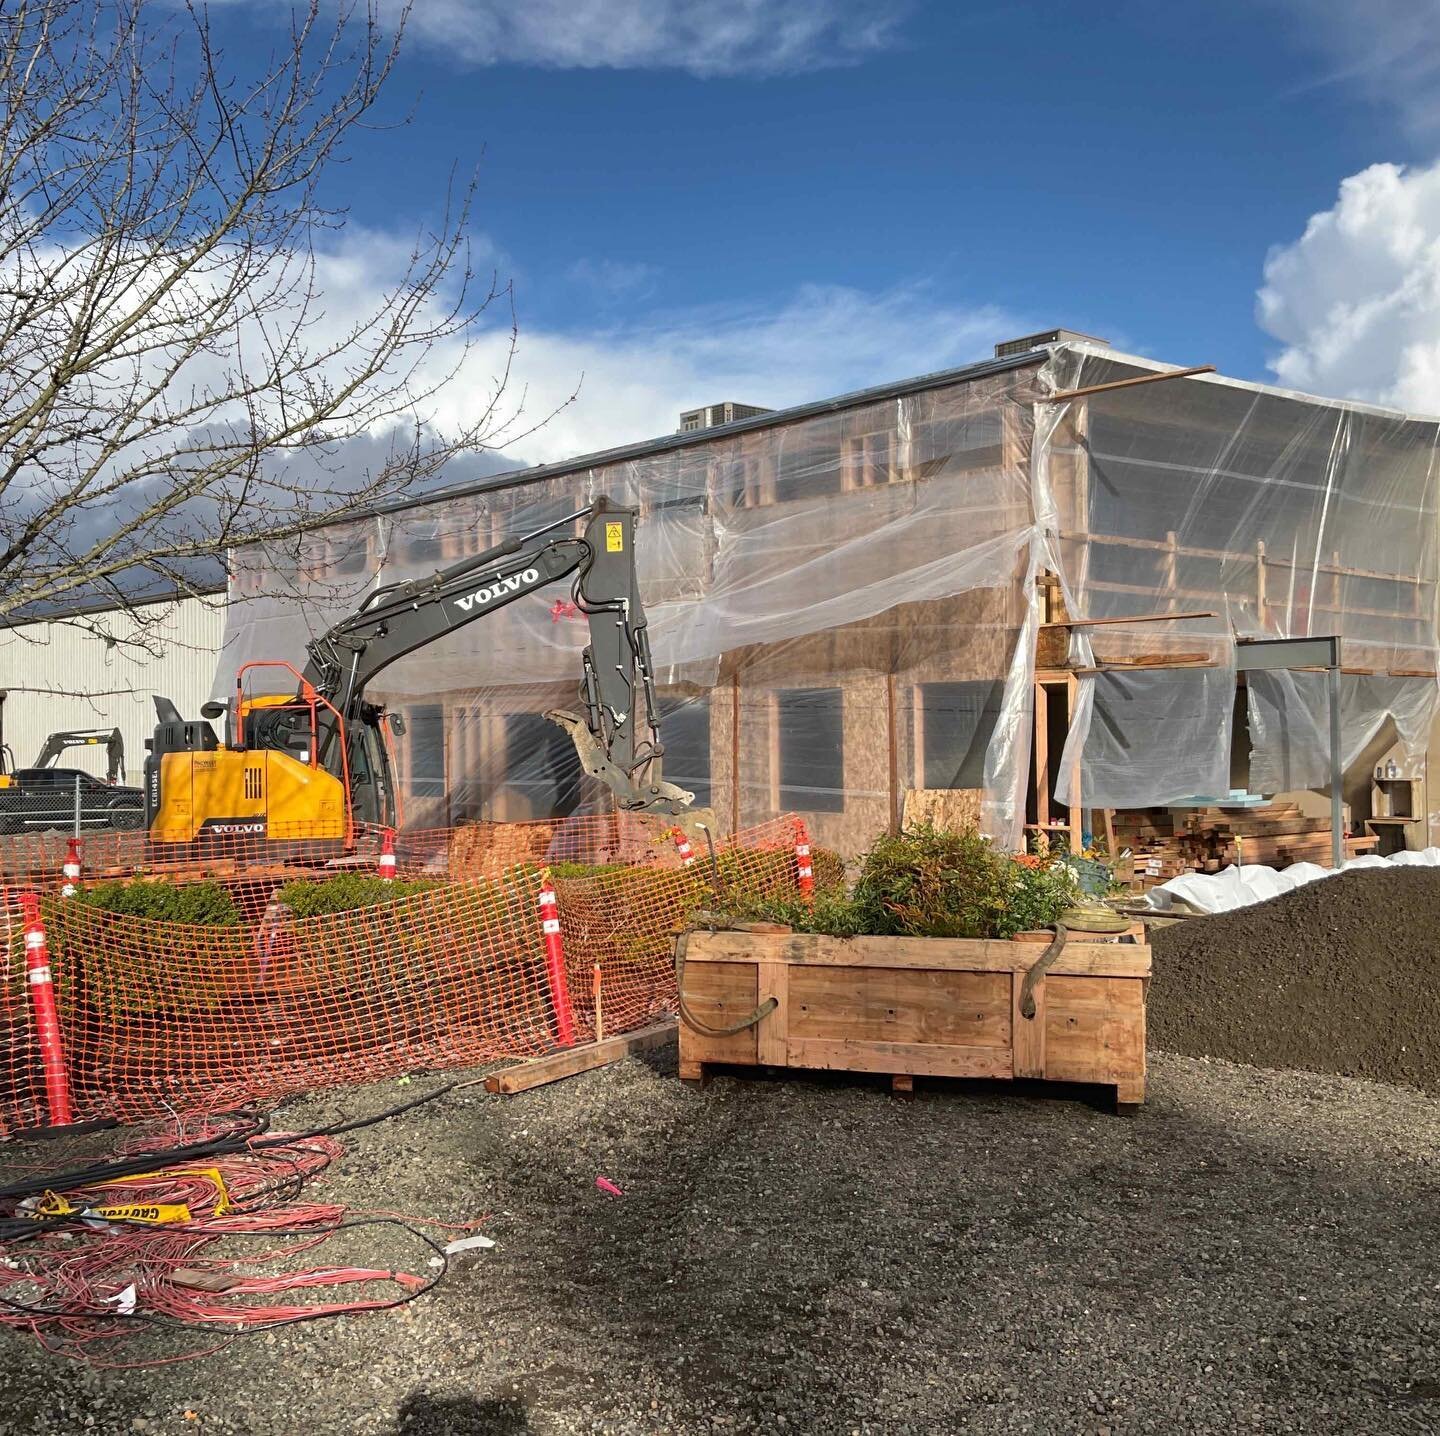 Oregon City Operations Complex project coming along. Exterior walls, interior slab on grade, thanks George for the pictures. #Emerick #EmerickConstruction #planbconsultancy @scottedwardsarchitecture @cityoforegoncity